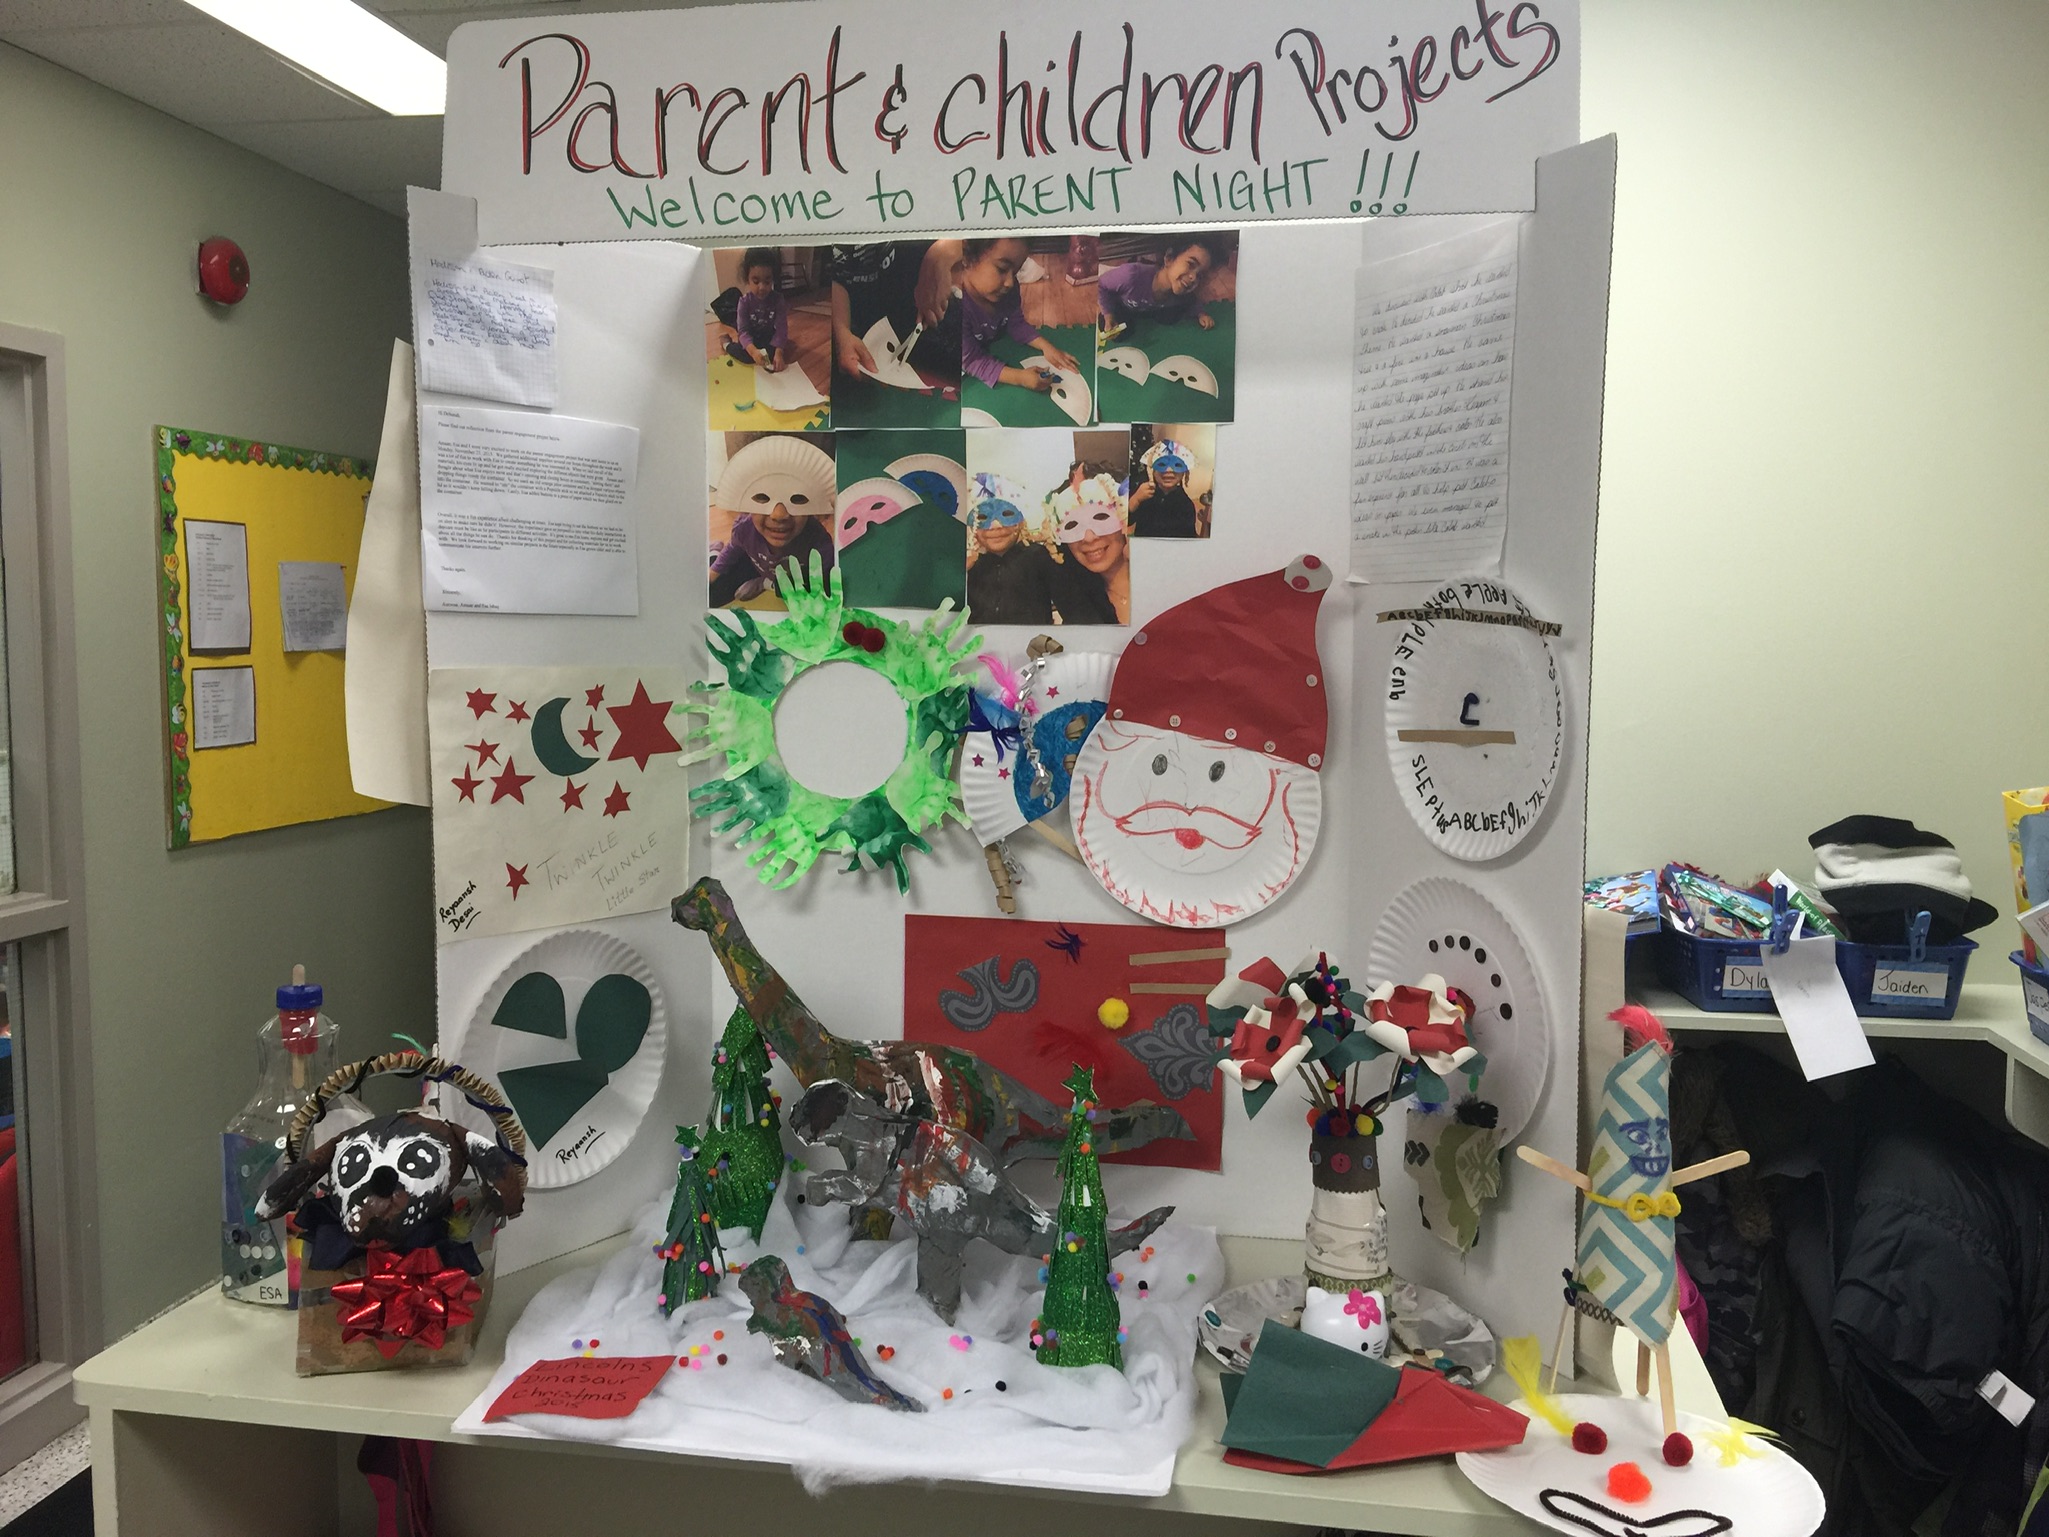 Poster board decorated in Holiday themes